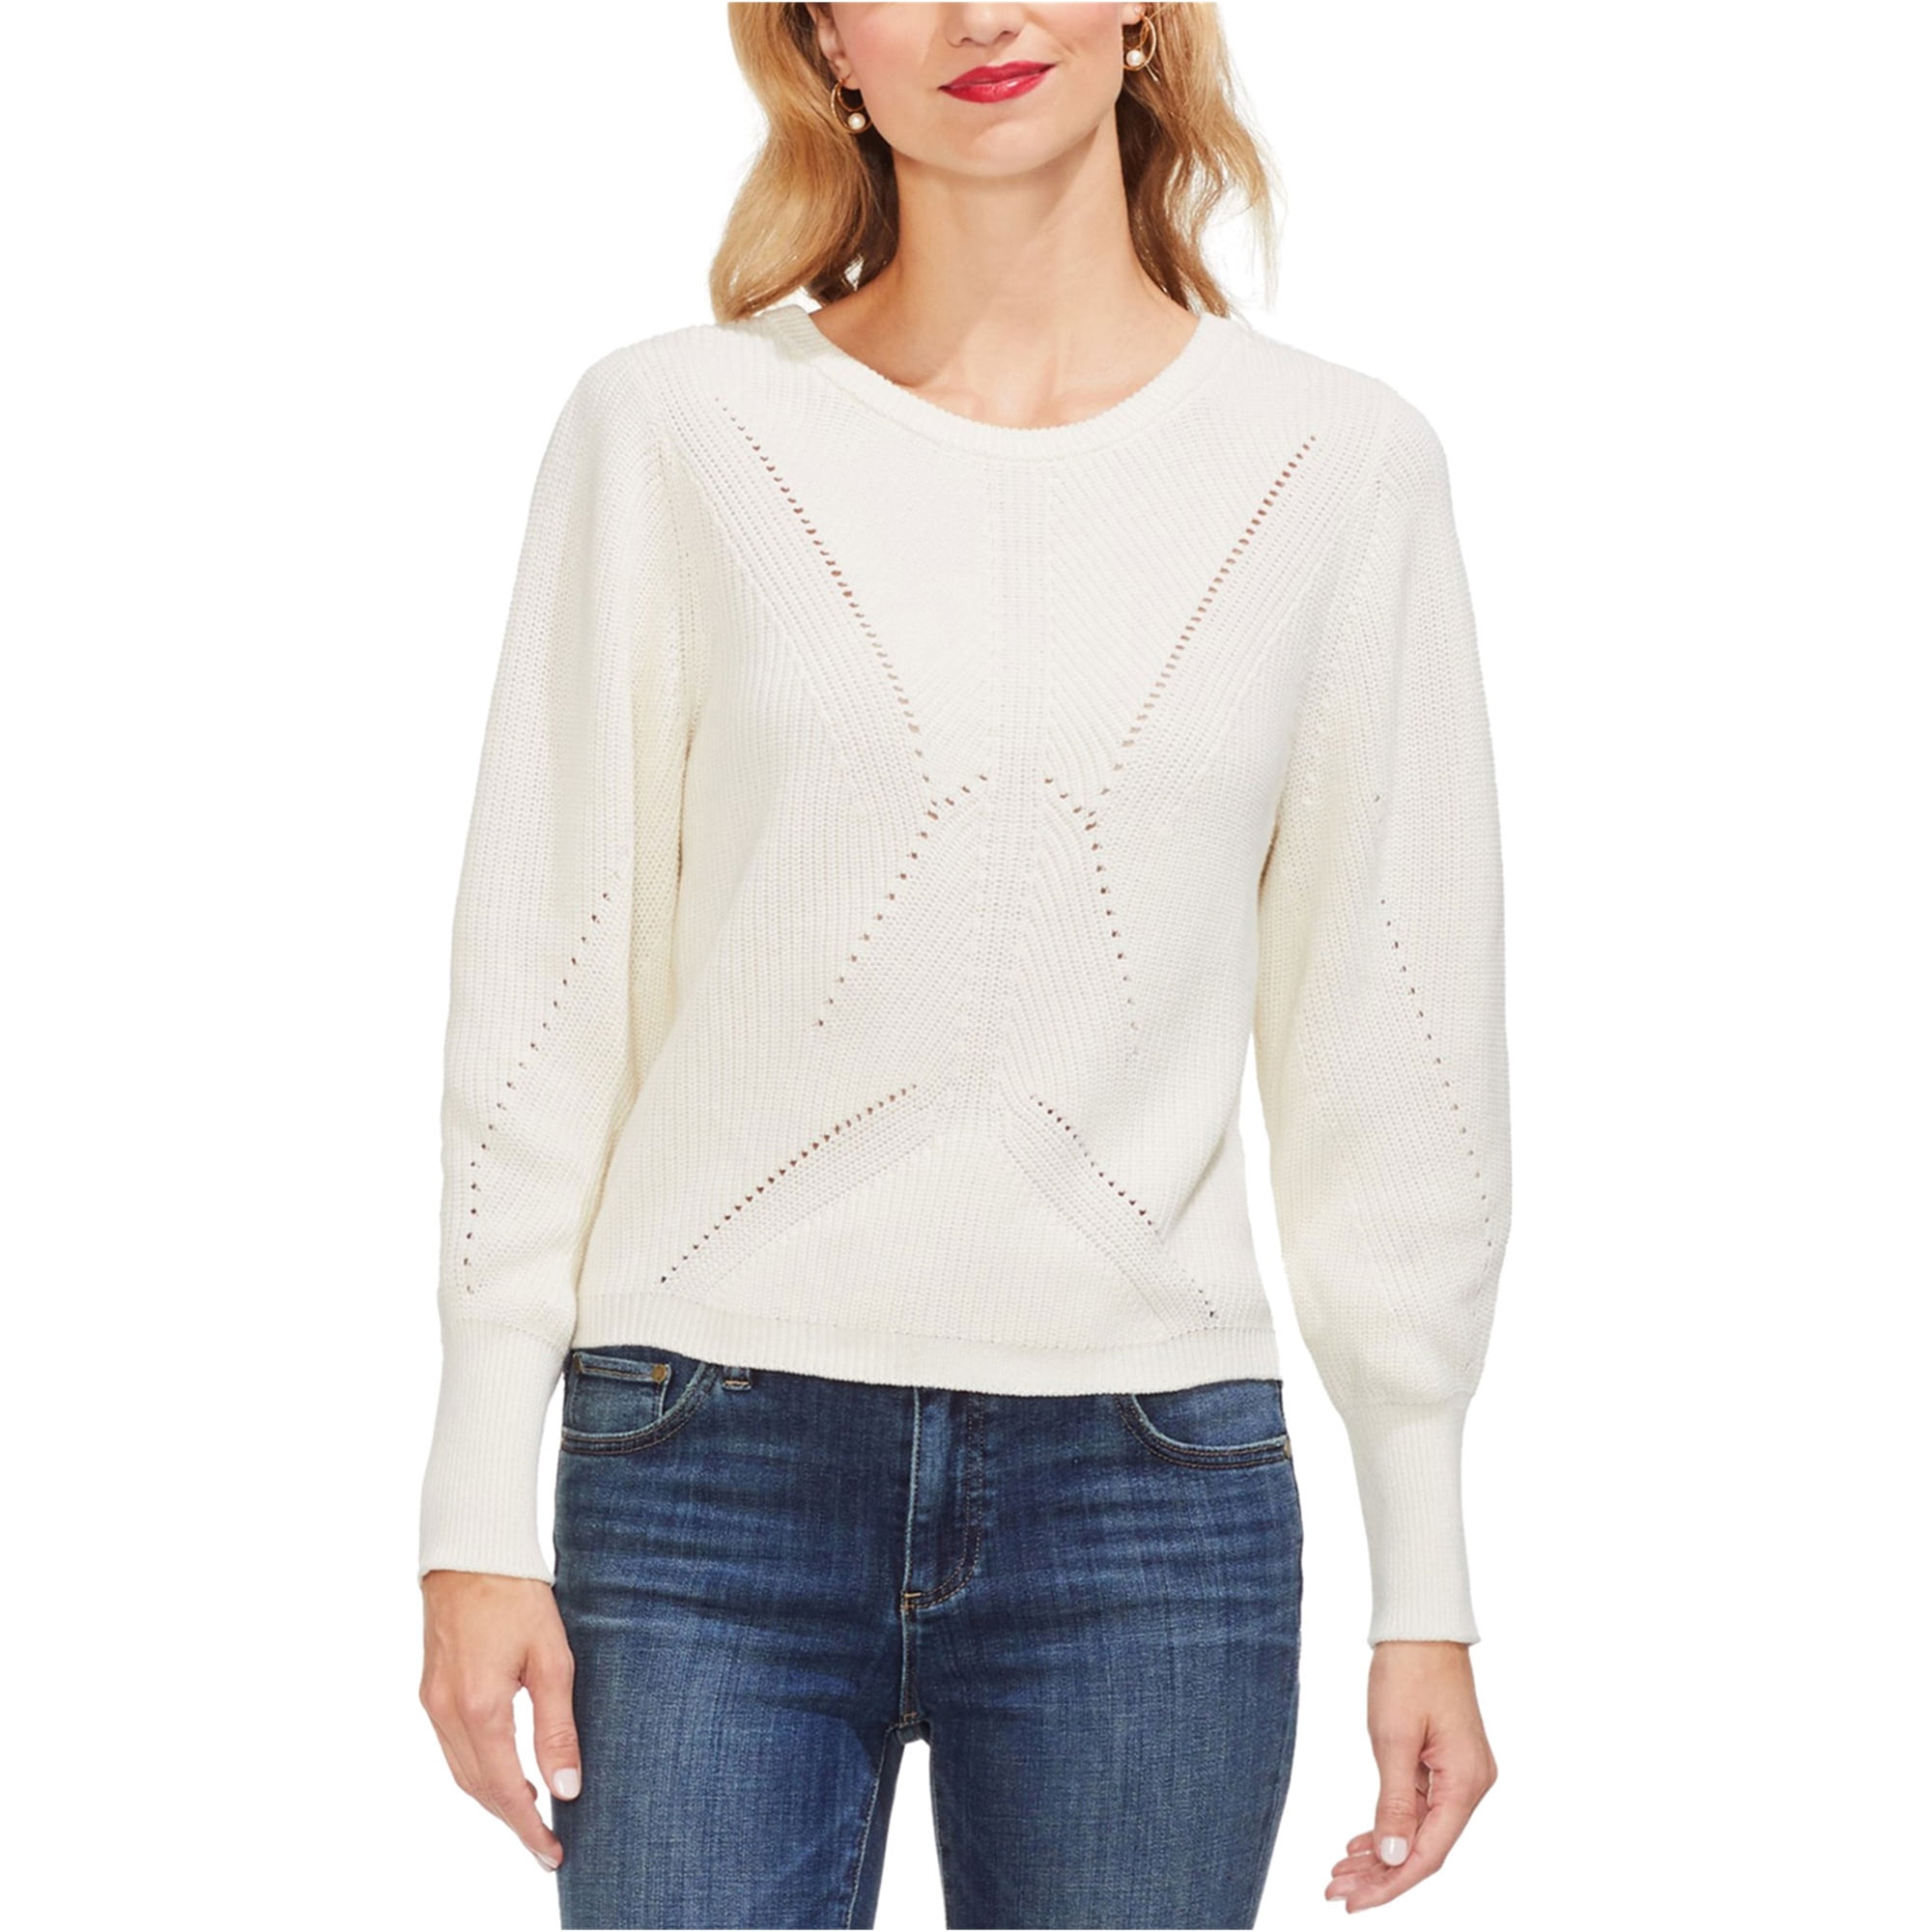 Vince Camuto Womens White V-Neck Colorblock Sweater Shirt M BHFO 8168